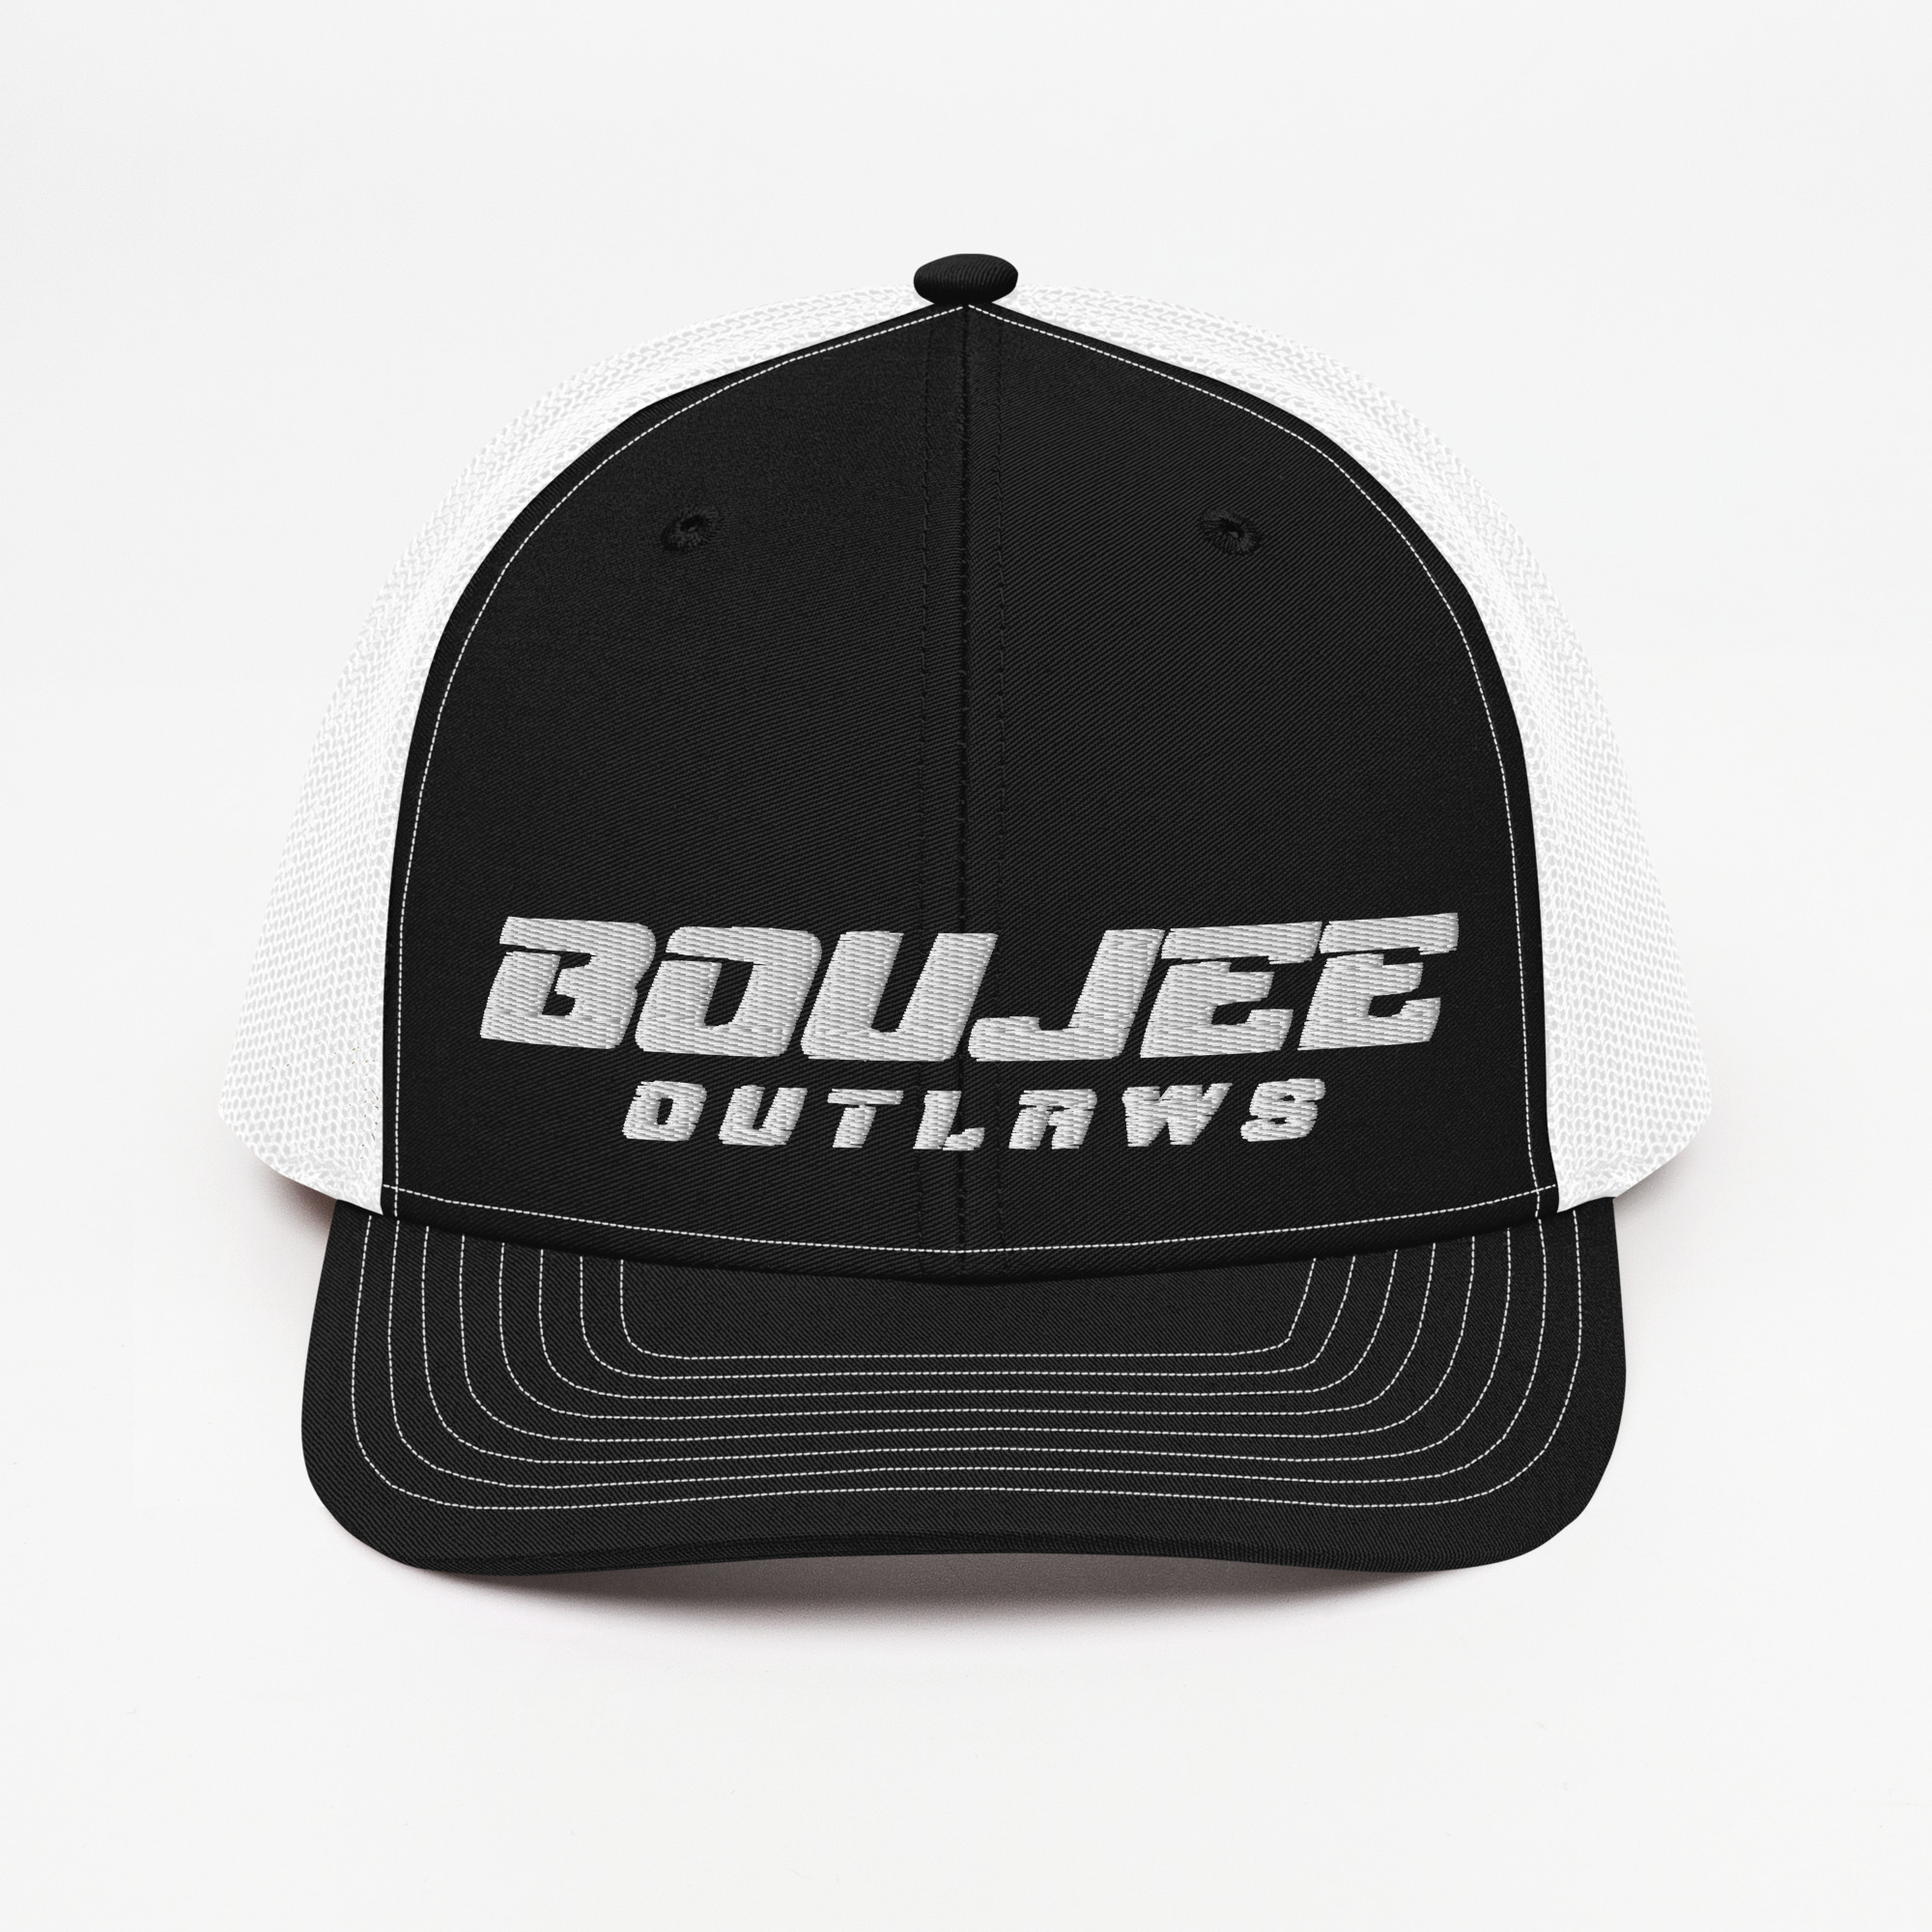 https://boujeeoutlaws.com/wp-content/uploads/woocommerce-placeholder.png